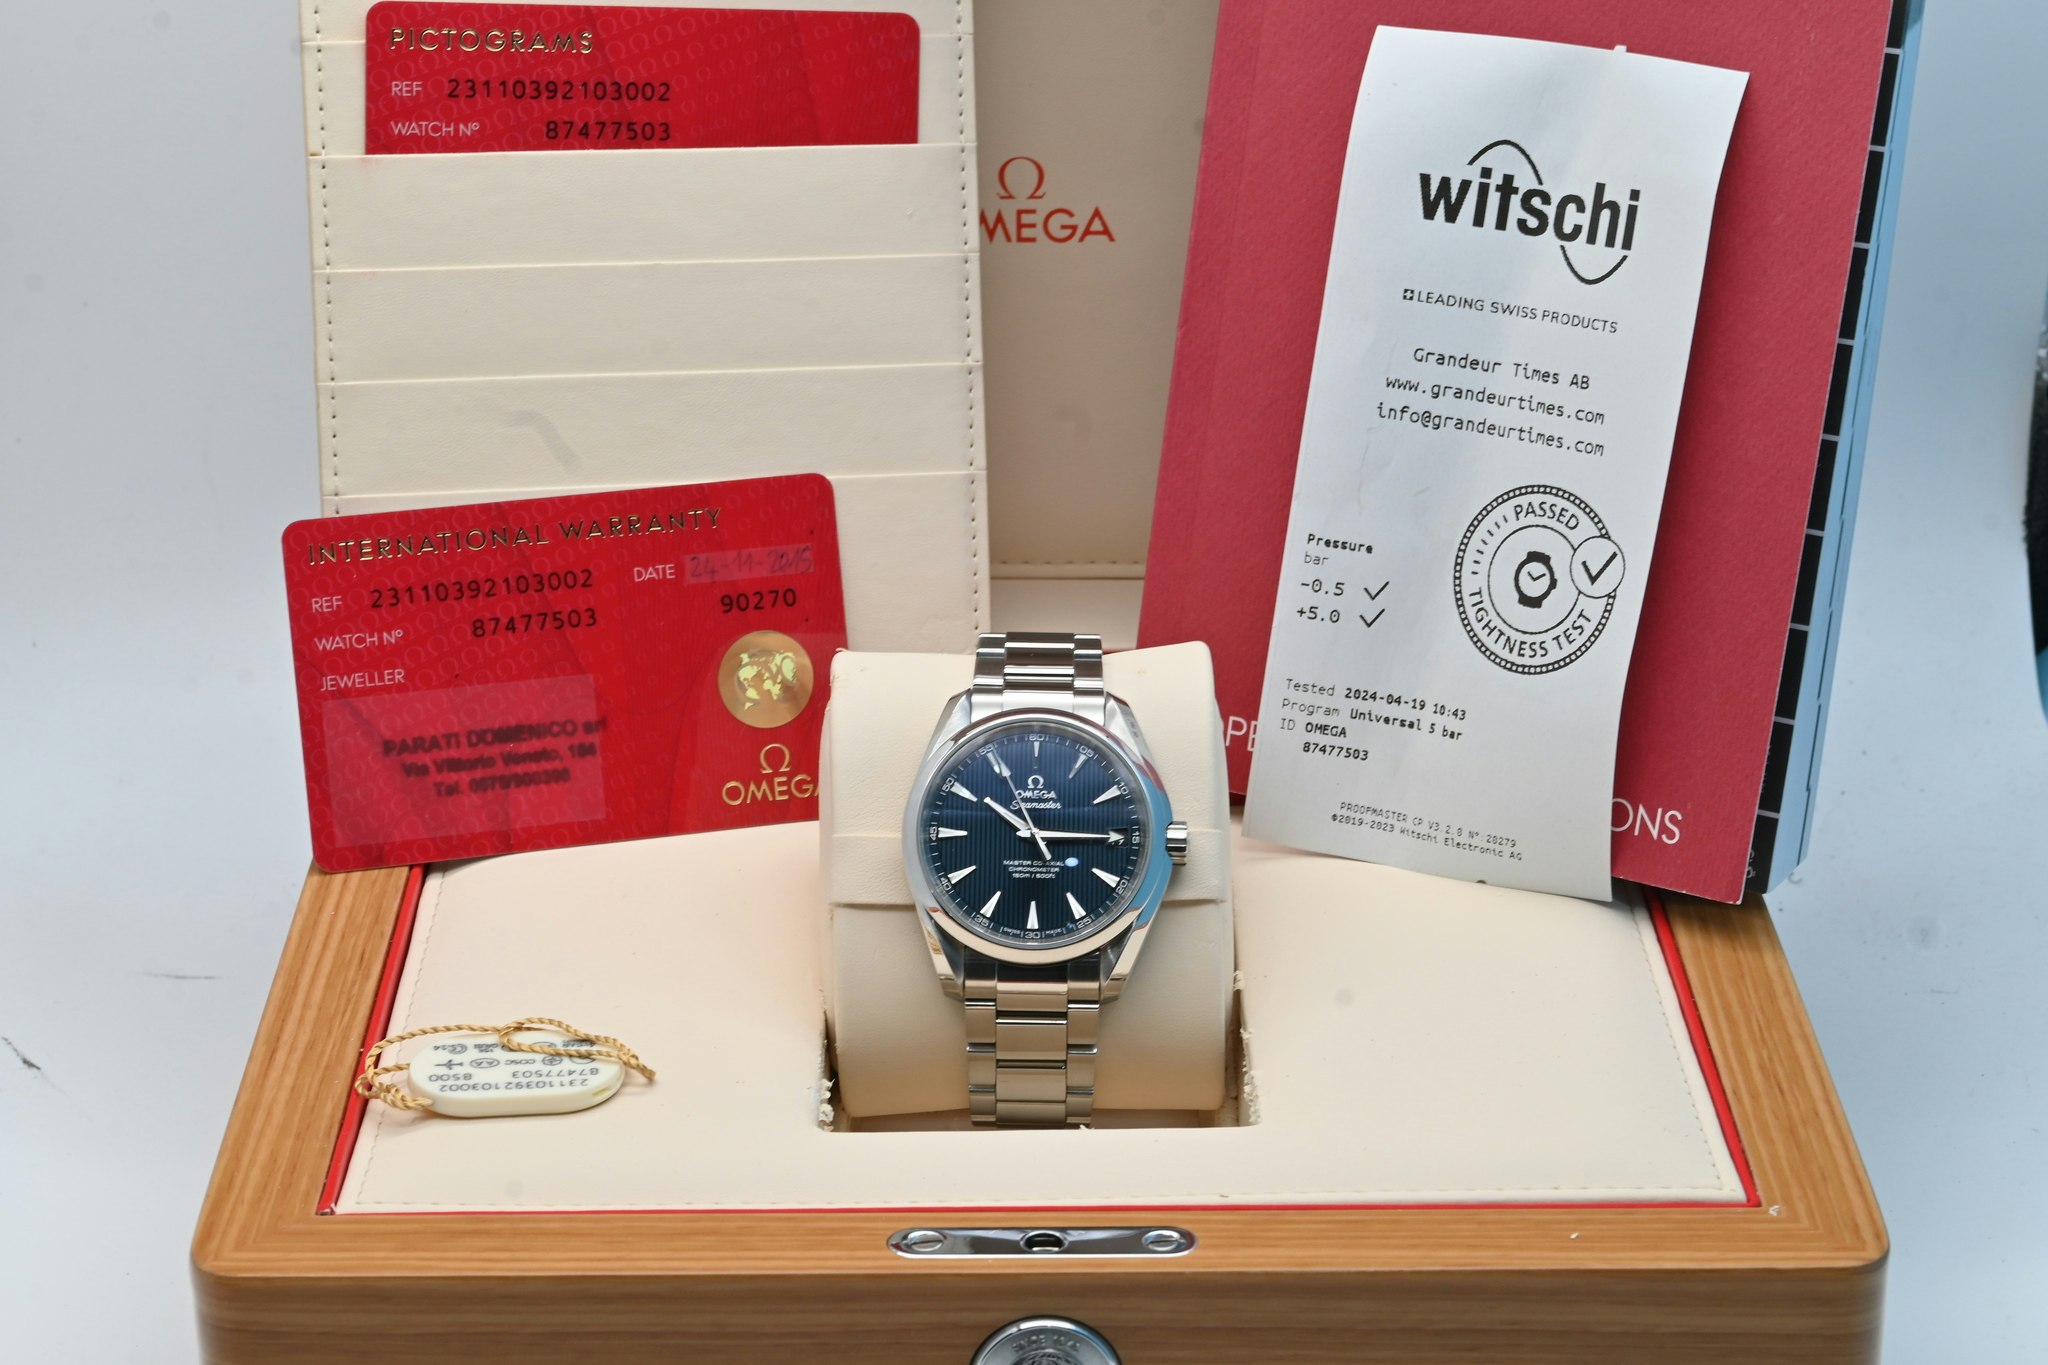 Sold: Omega Seamaster Aqua Terra 231.10-39.21.03.002 Box & Papers Top condition - 667